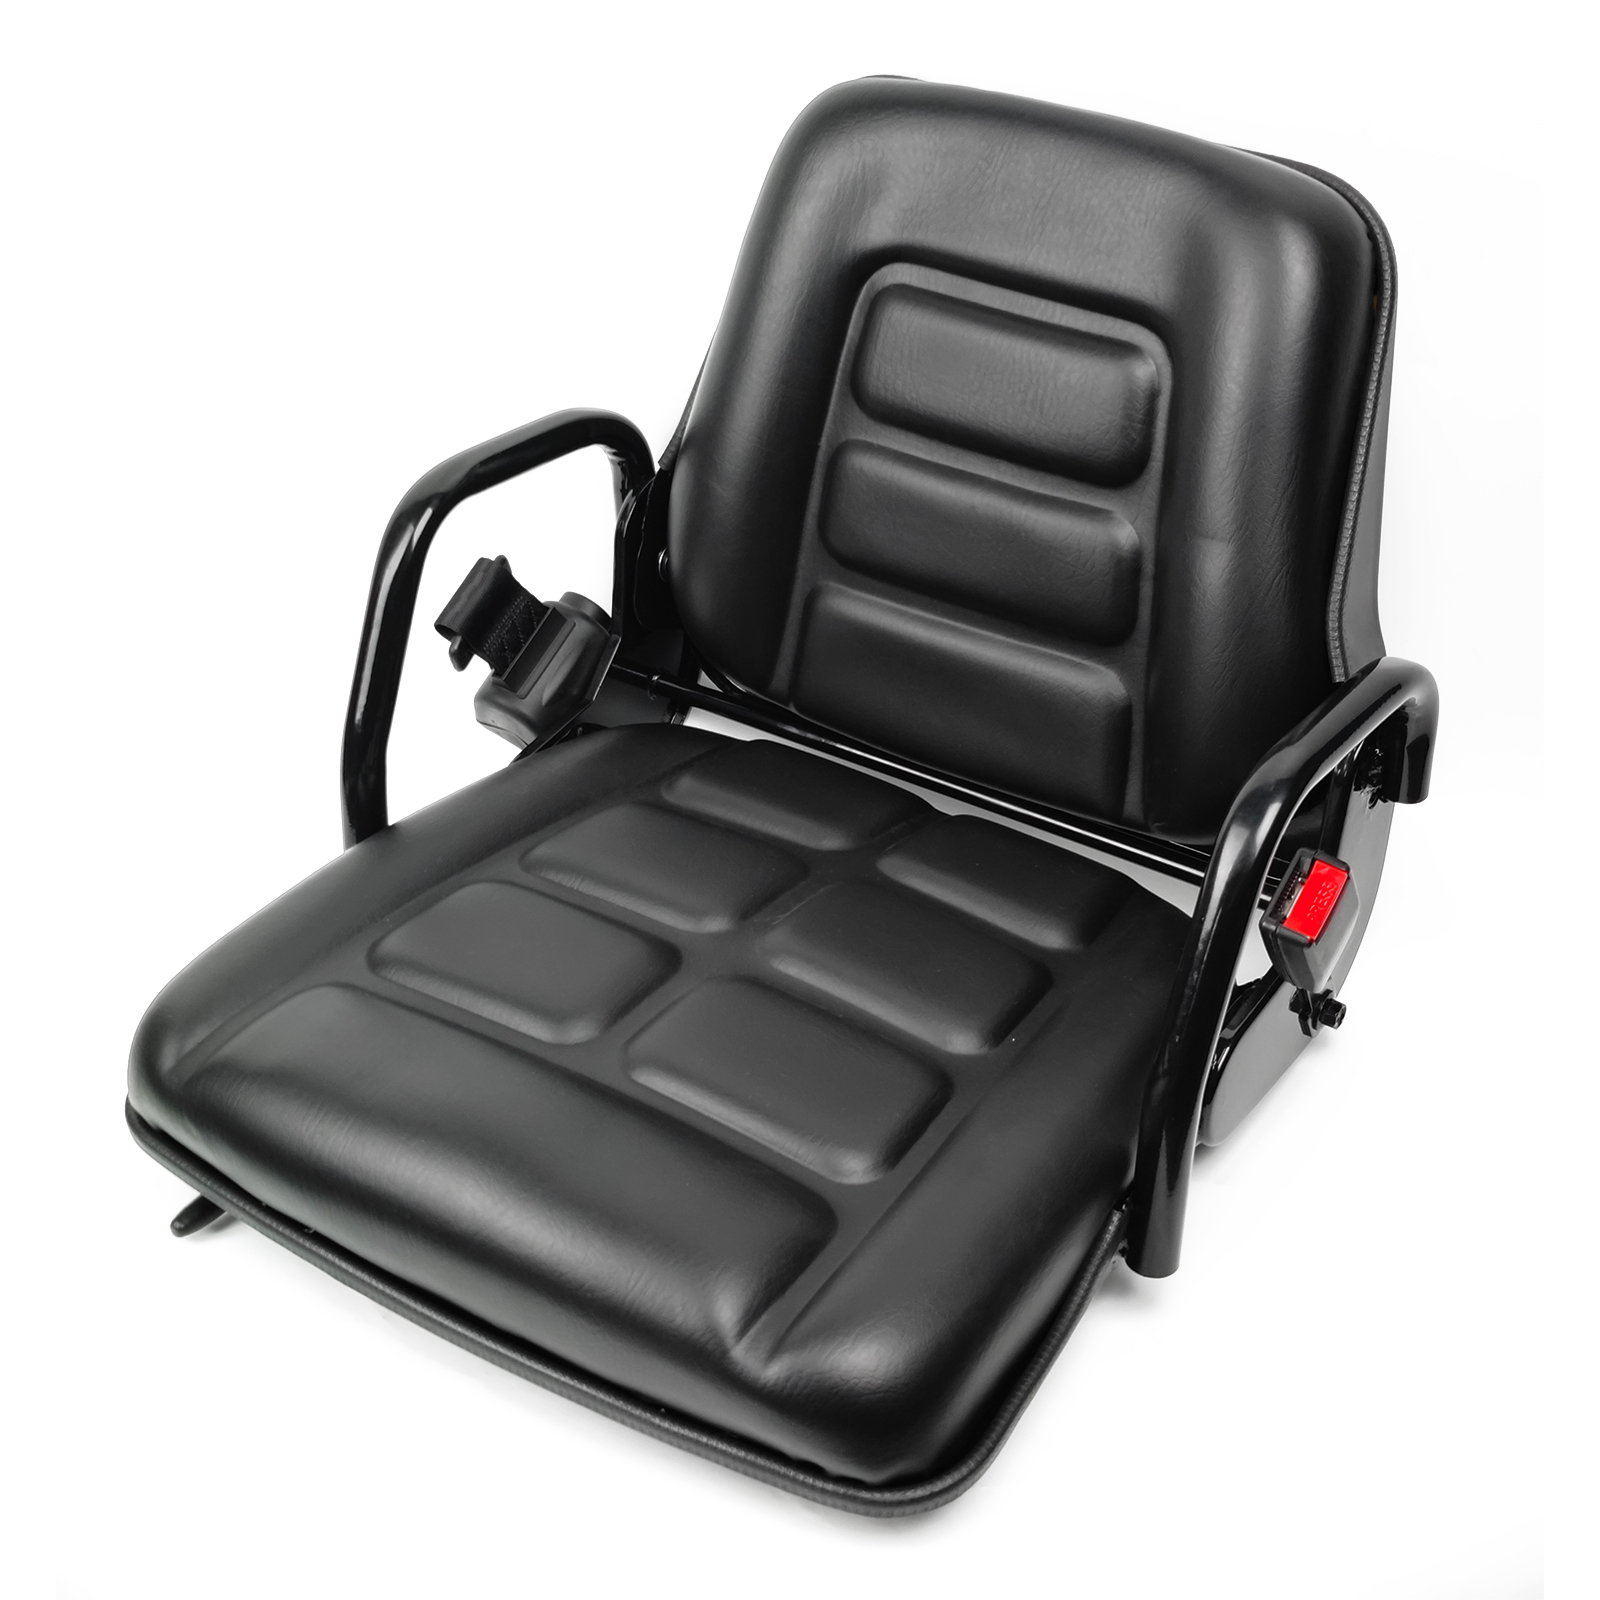 2020 Latest Design Air Ride Truck Seats - Forklift Seat with Integrated Steel Armrest Fold Down Backrest Fits Caterpillar Mitsubishi Doosan forklifts – Qinglin Seat